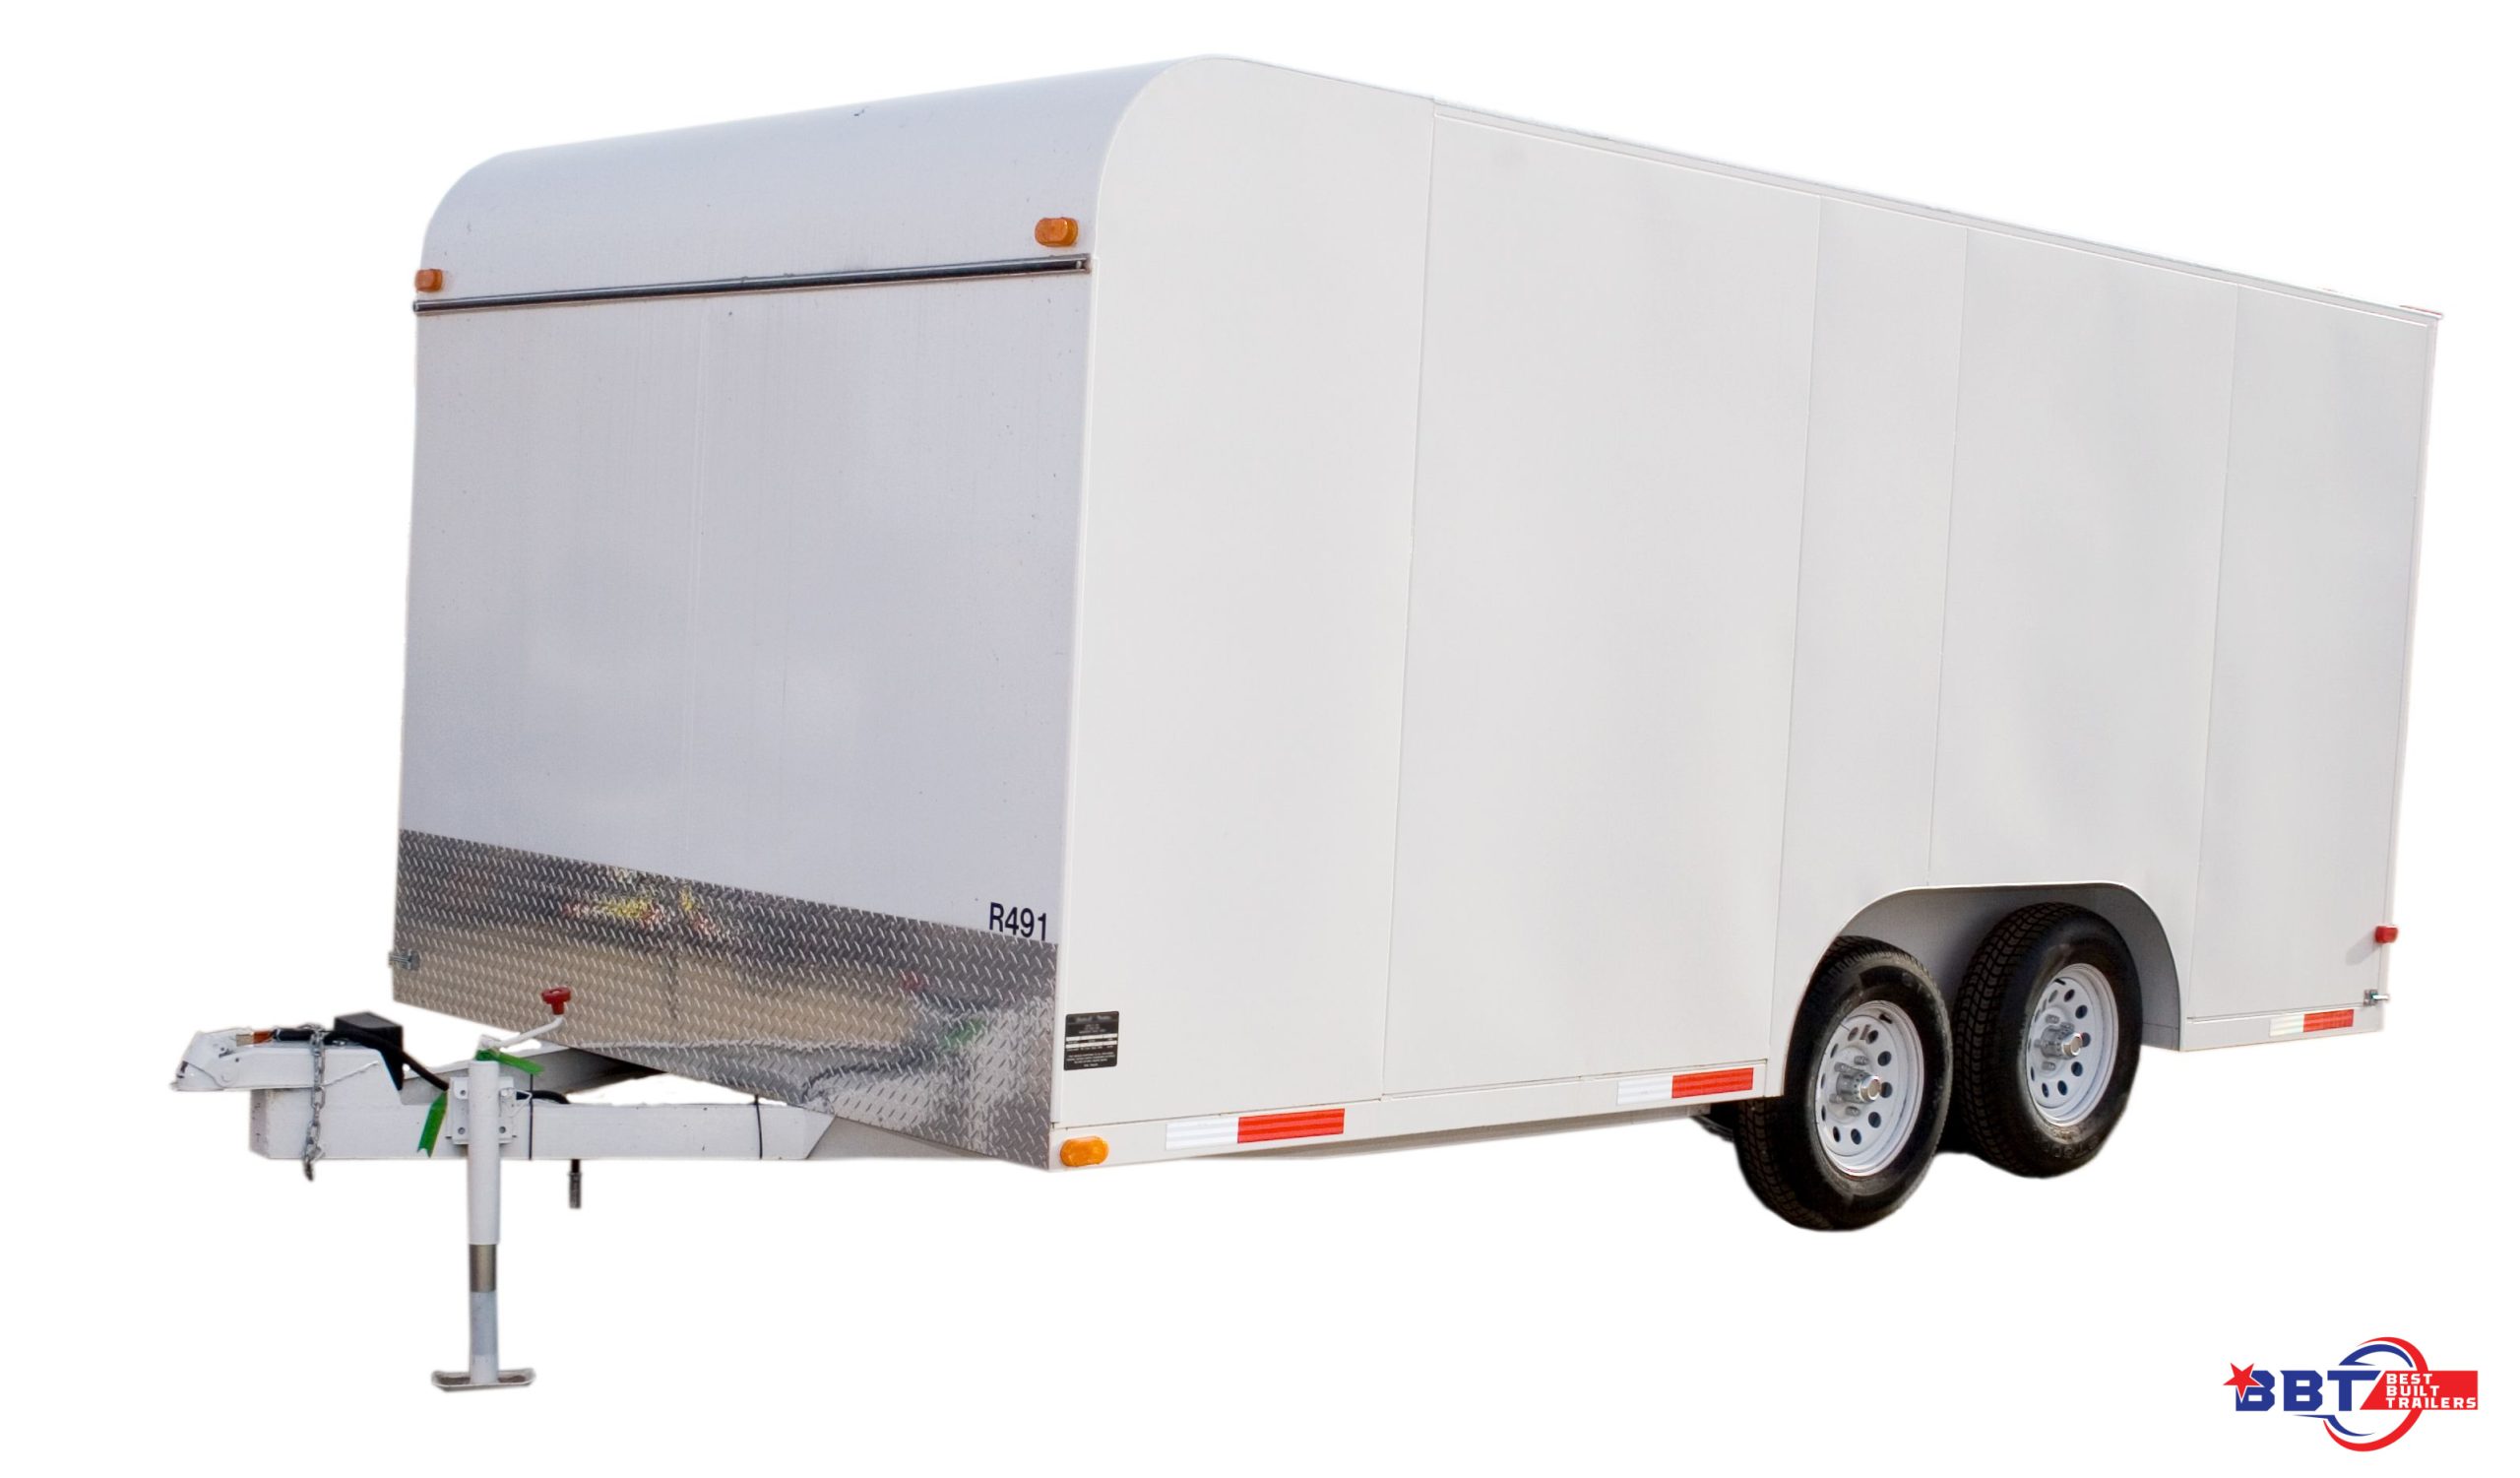 How Could an Enclosed Trailer Benefit Your Move to Granite Falls in the Near Future?